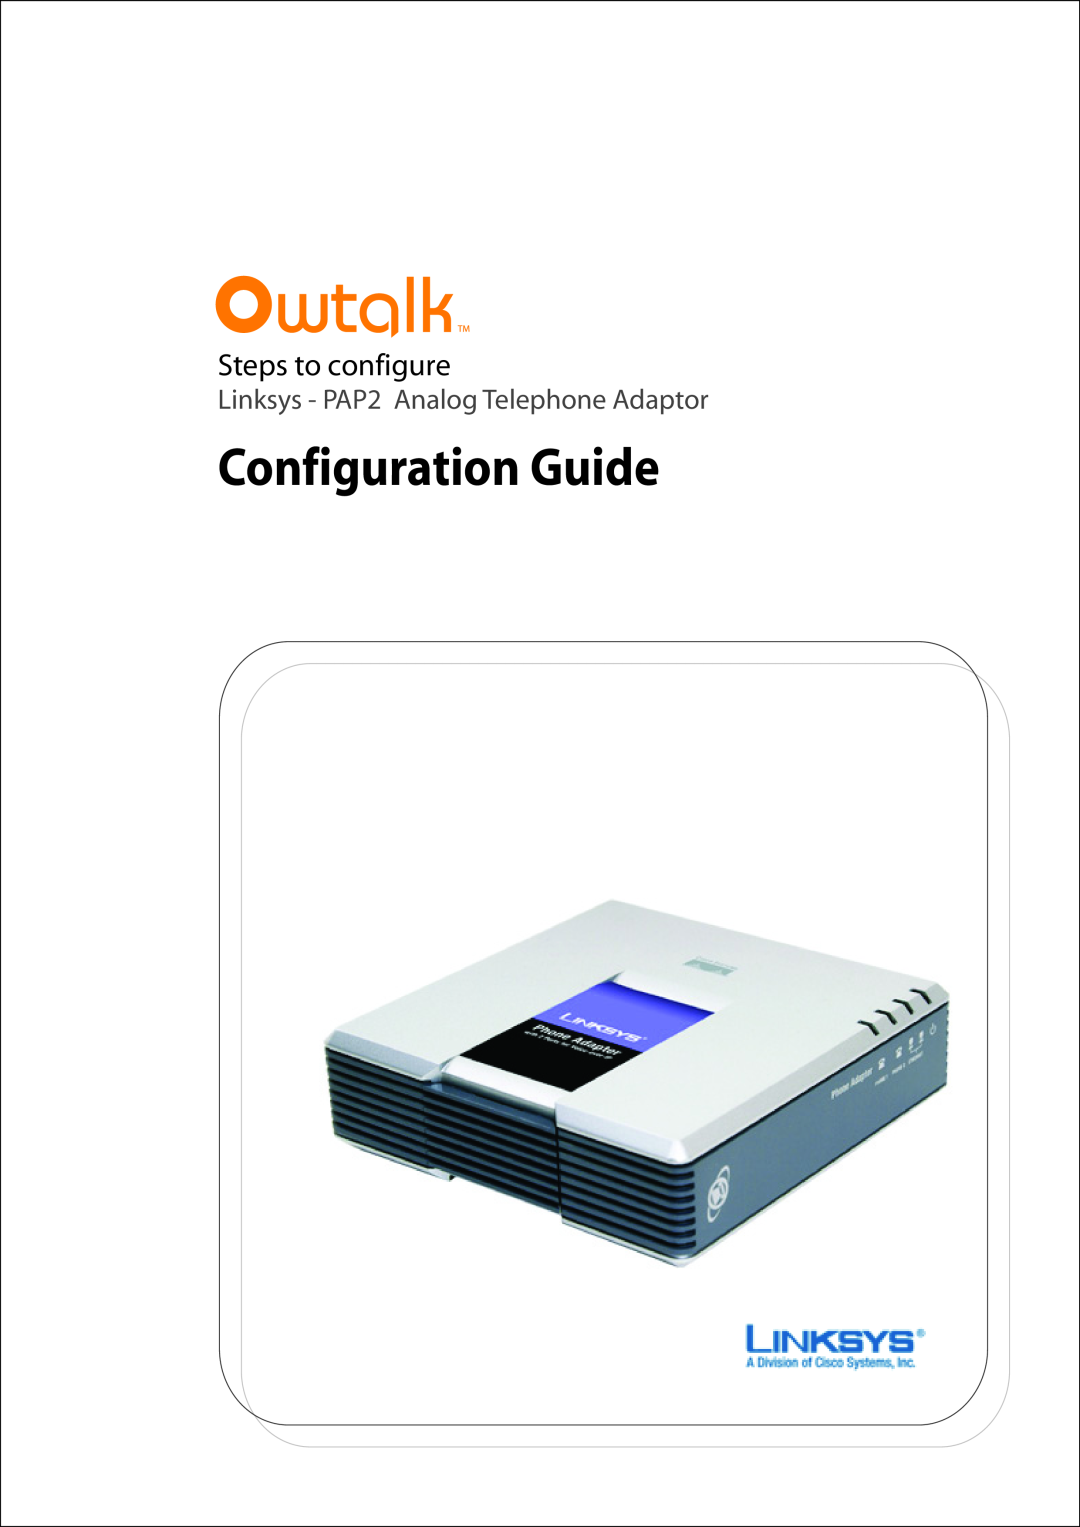 Linksys Owtalk manual Configuration Guide, Steps to configure, Linksys - PAP2 Analog Telephone Adaptor 